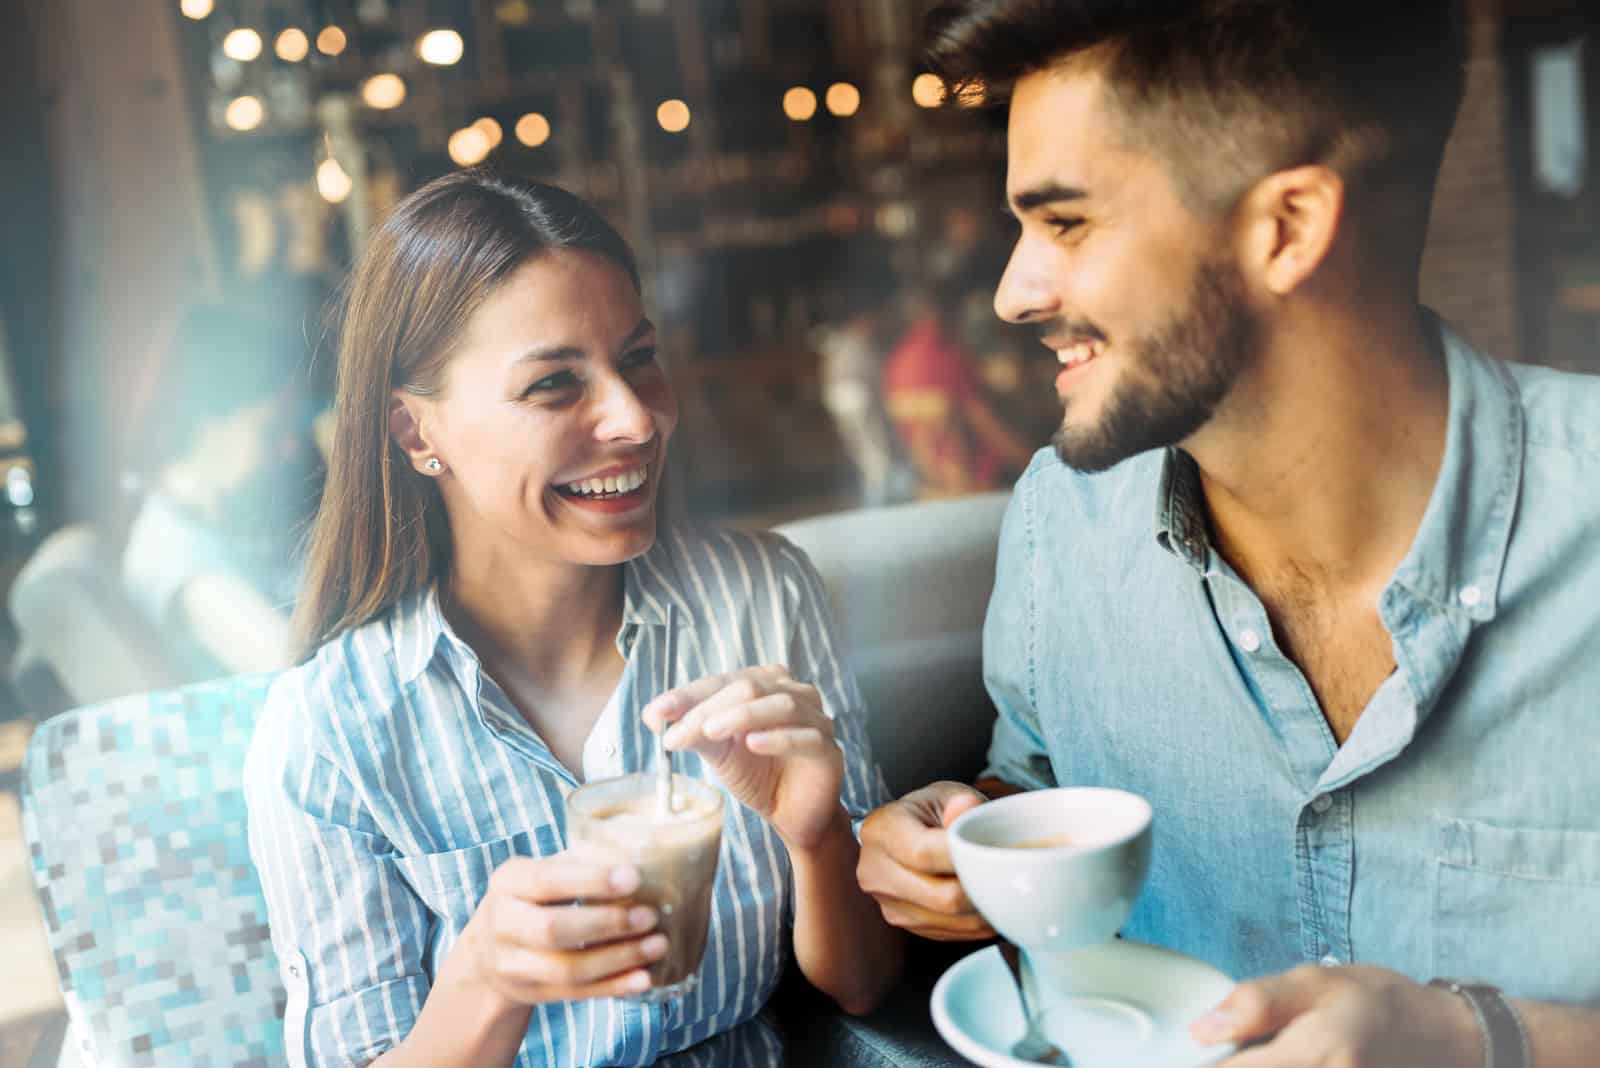 a smiling man and woman sit and talk over coffee